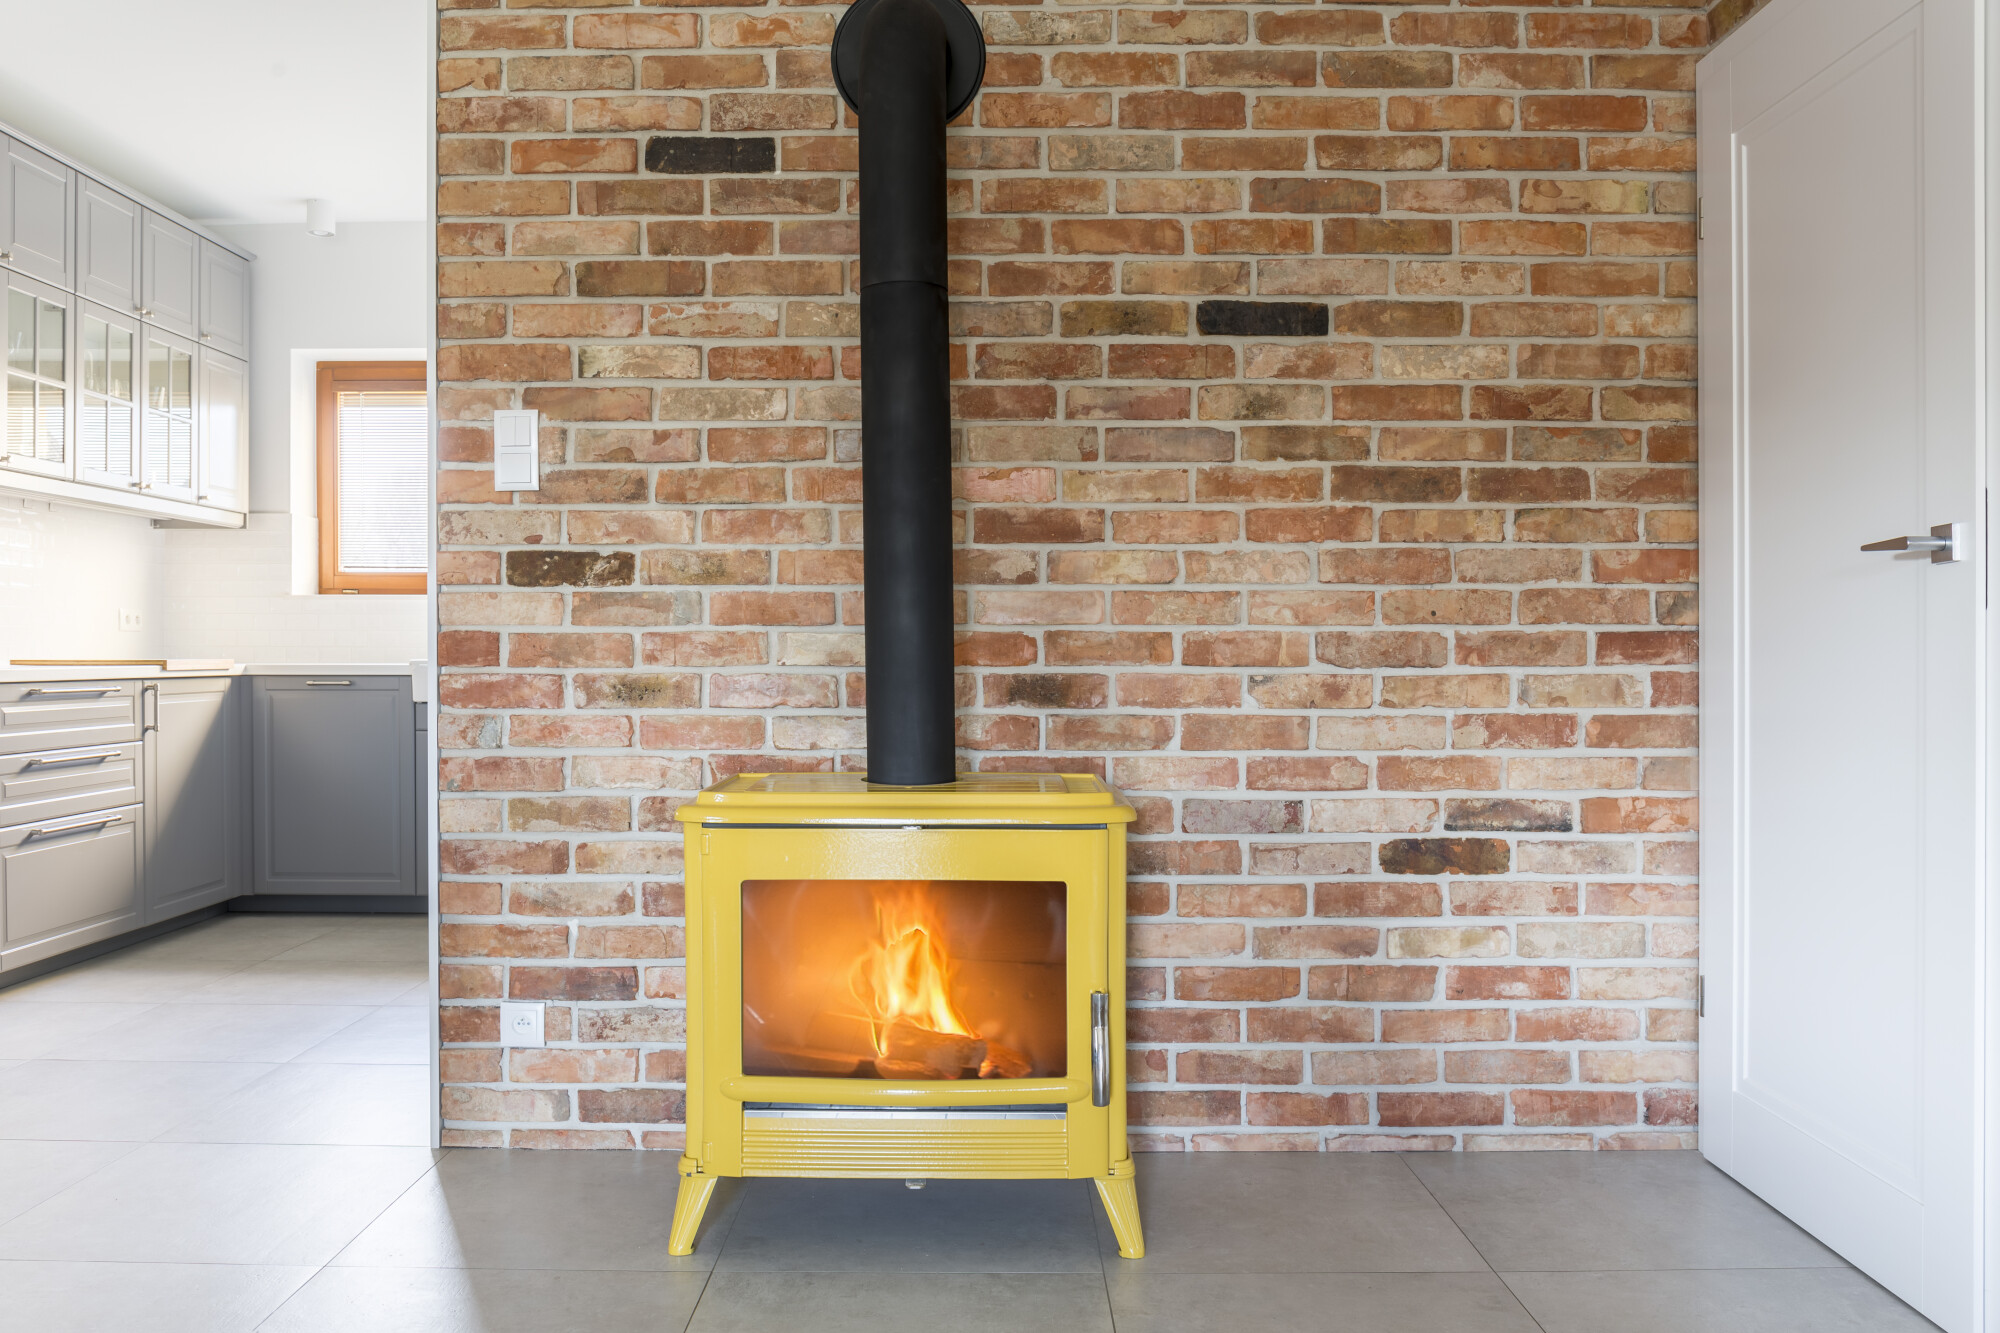 Loft,With,Red,Brick,Wall,And,Yellow,Freestanding,Stove